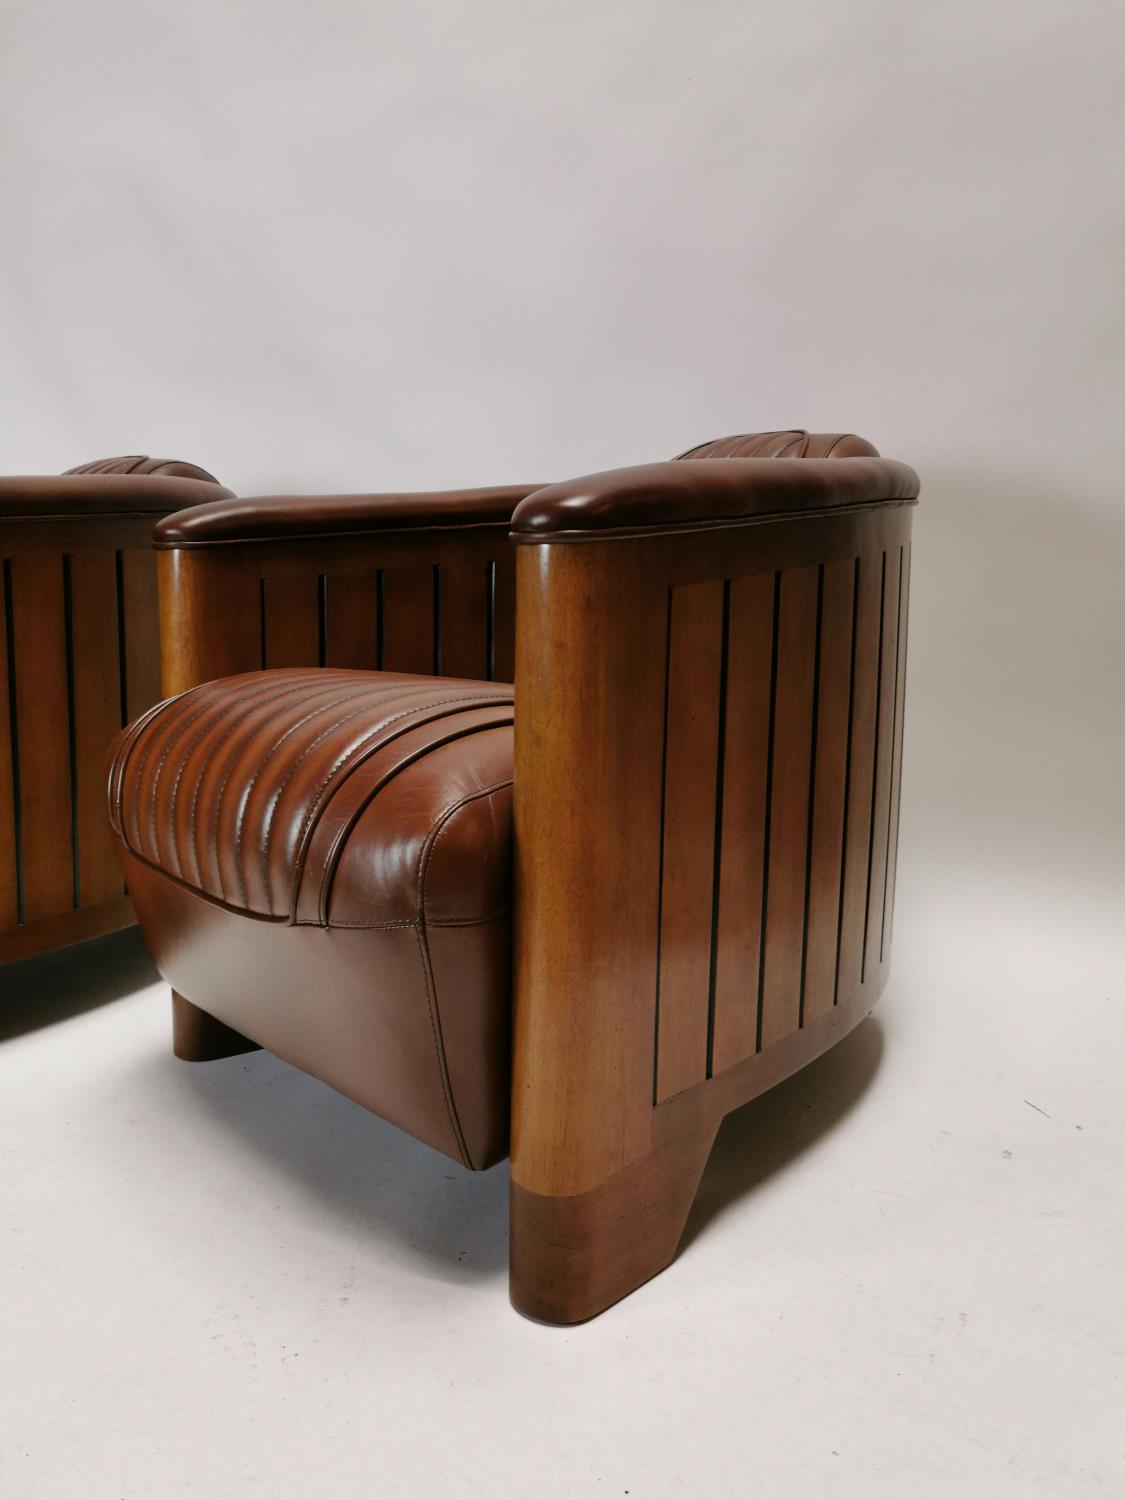 Pair of exceptional quality Art Deco style leather upholstered and wood Aviator club chairs {72 cm H - Image 2 of 4